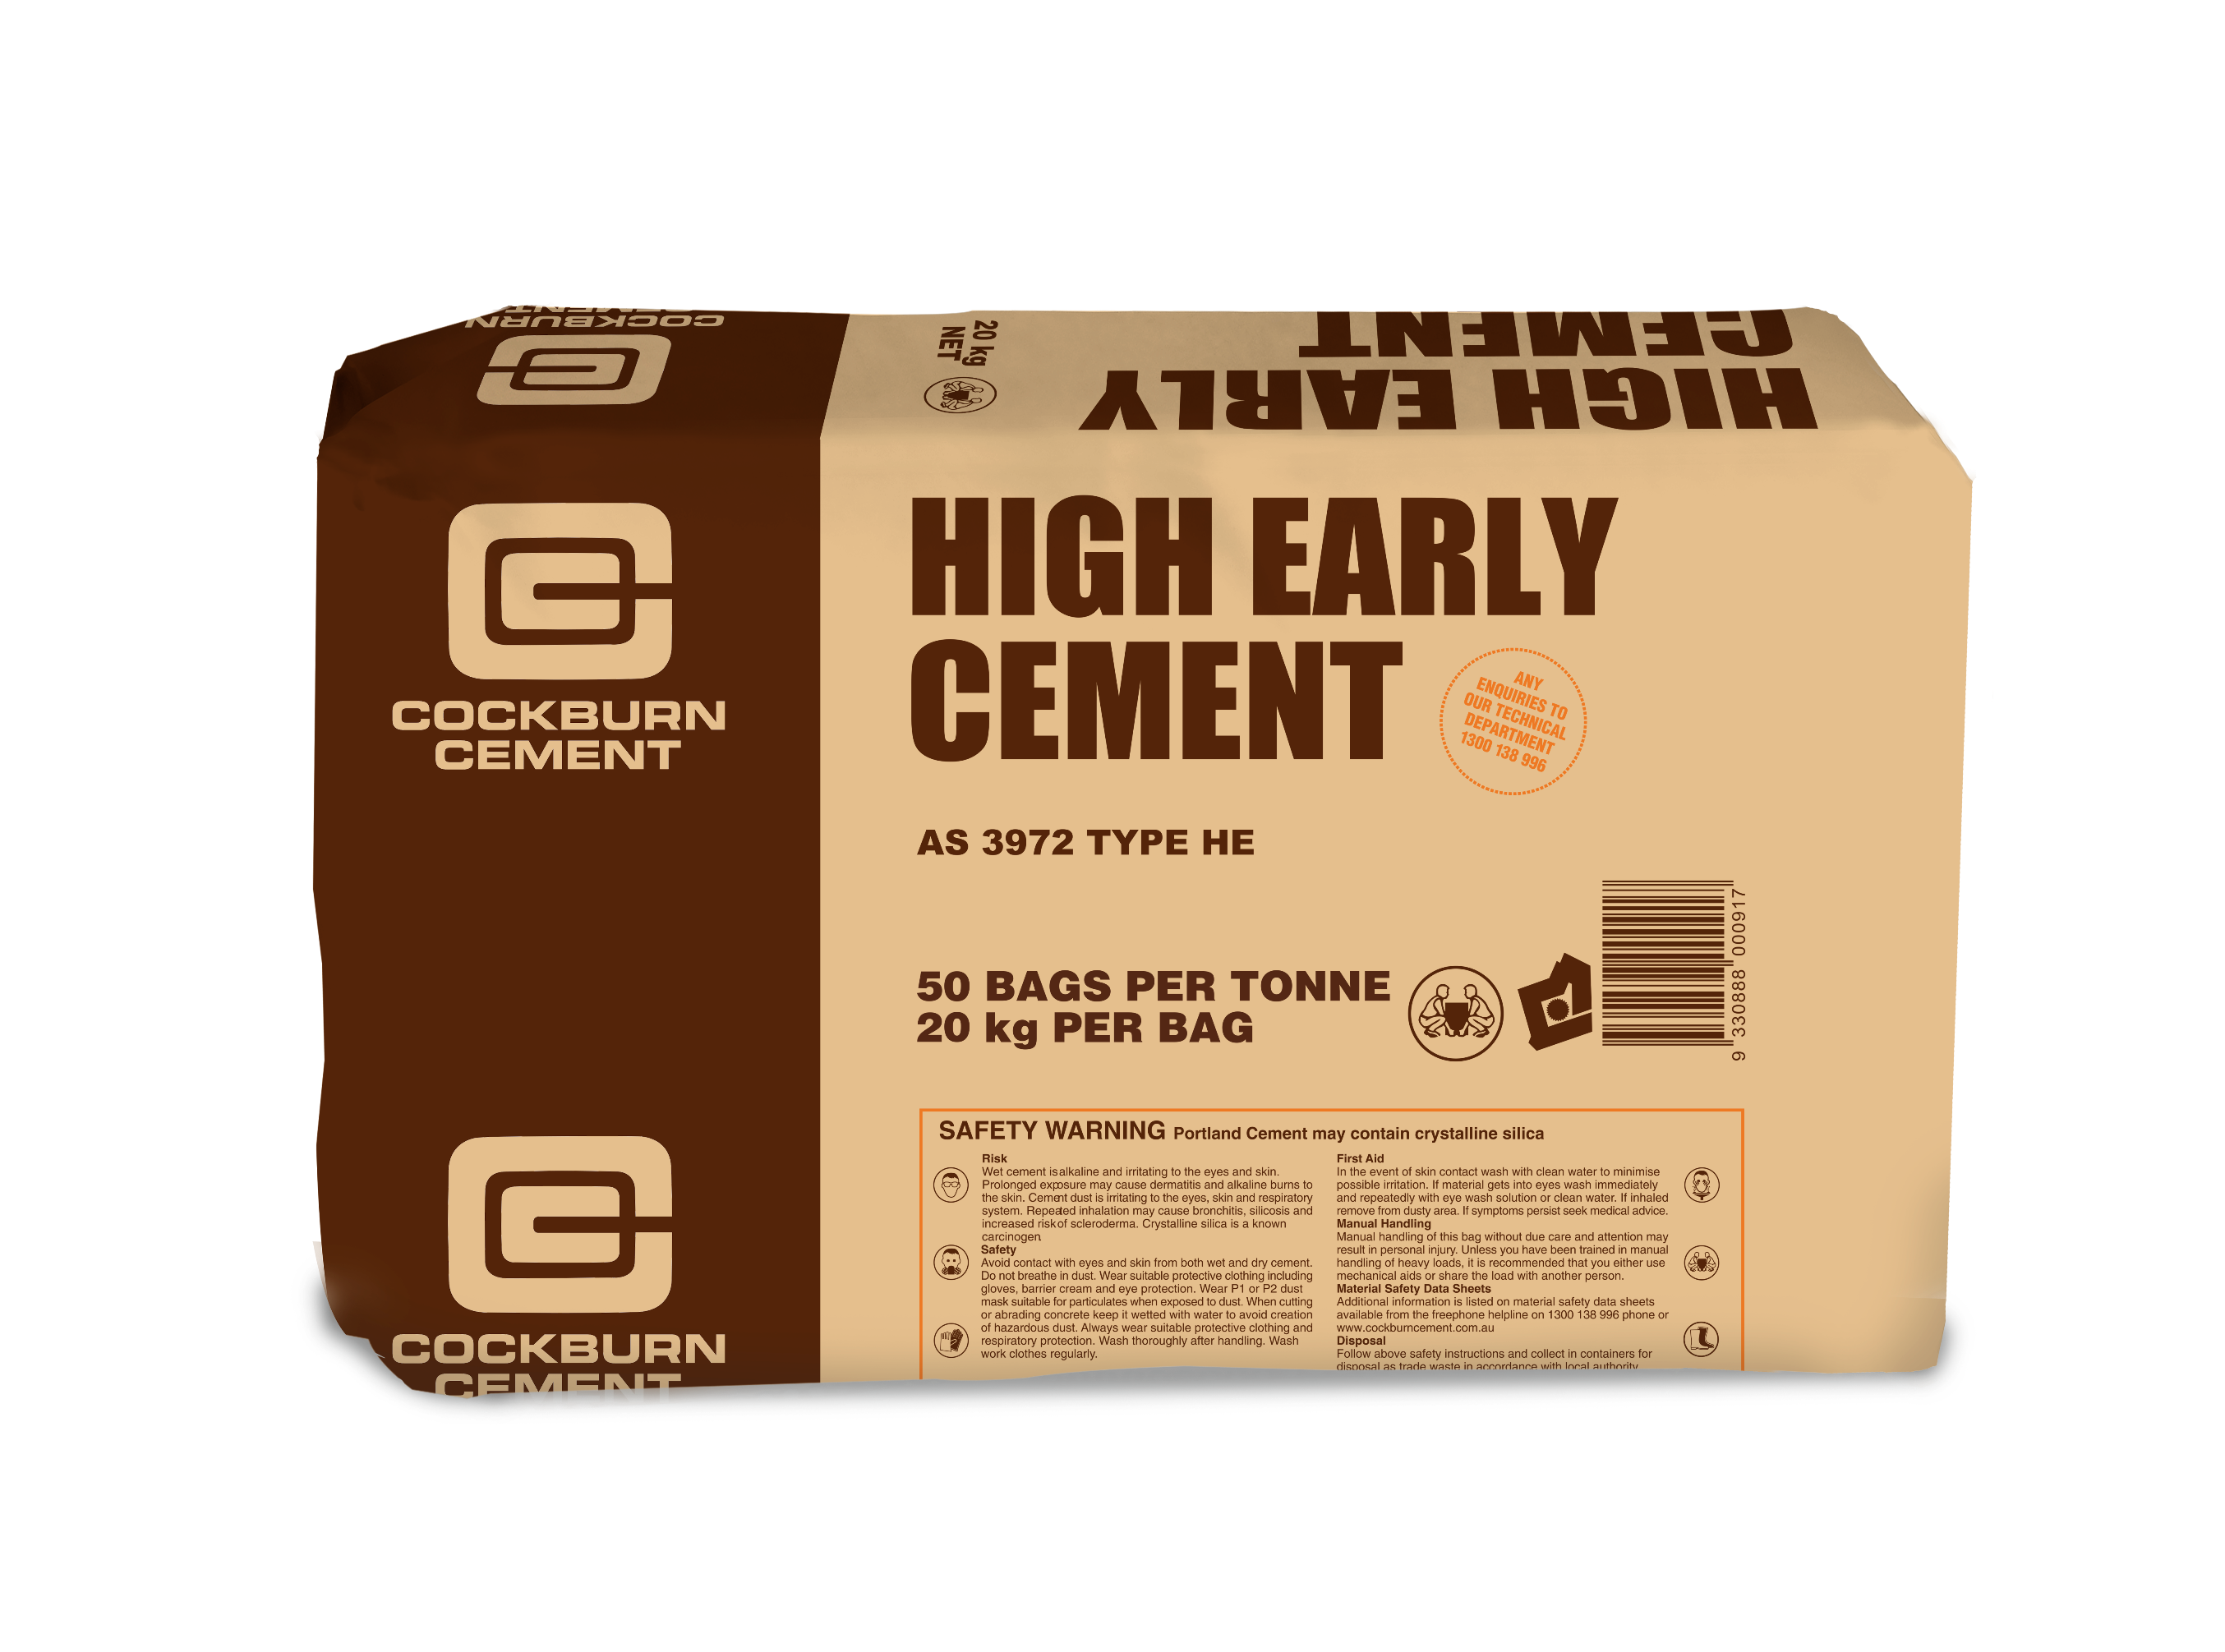 High Early Strength Cement - Cockburn Cement